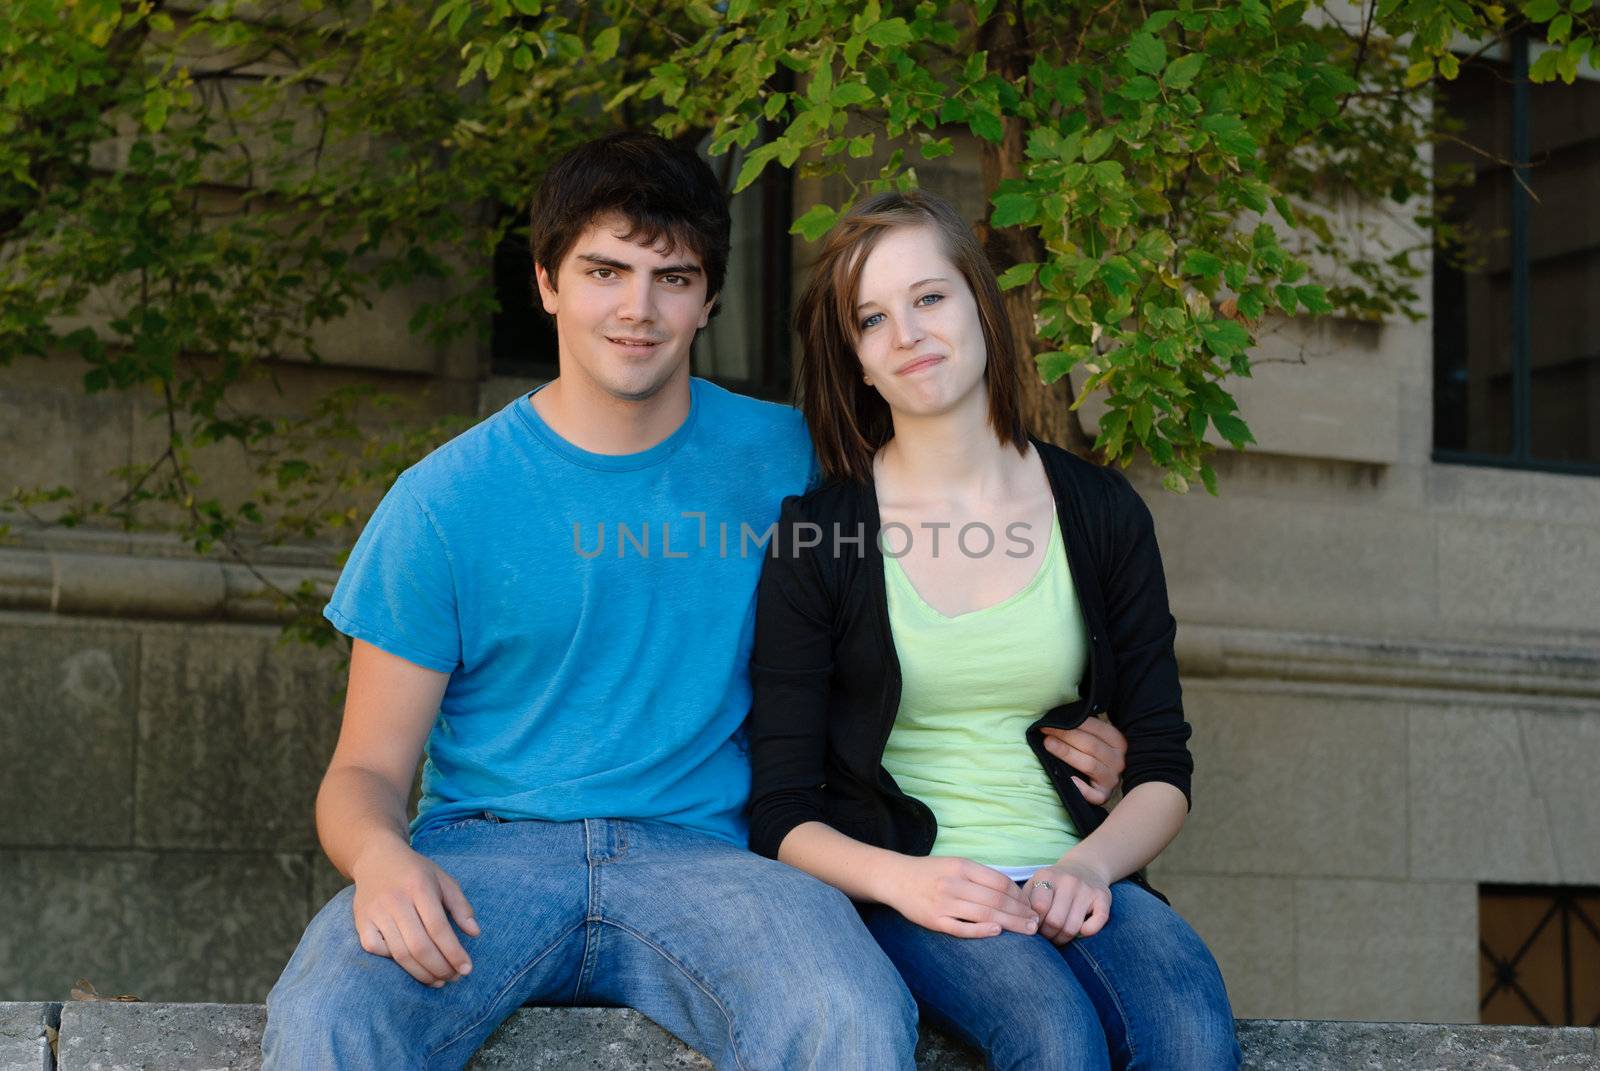 A happy teen couple sitting beside each other with a stone building in the background.